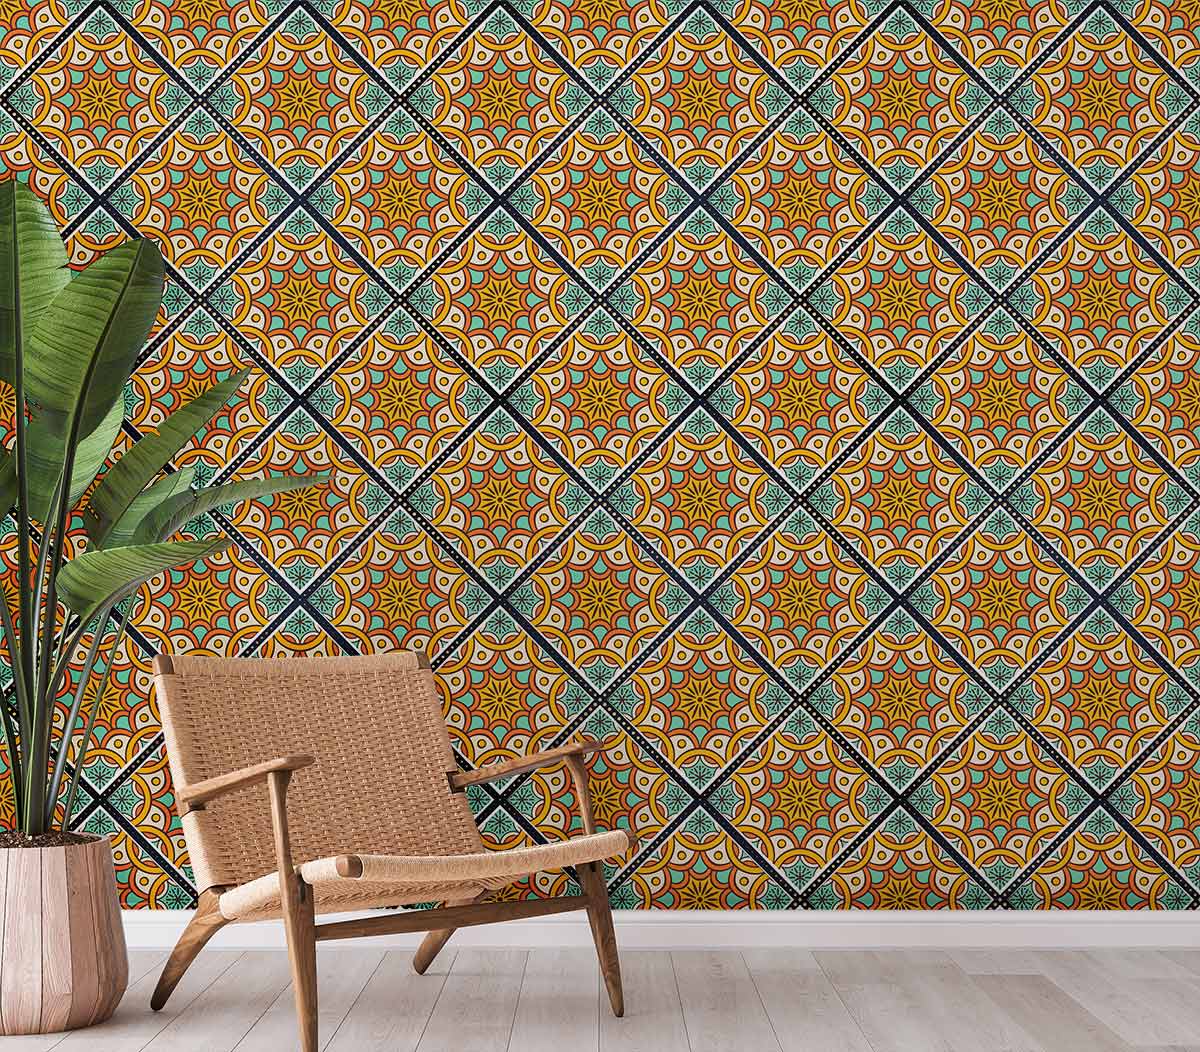 A repeating yellow and green pattern creates an eye-catching wallpaper mural for a hallway.